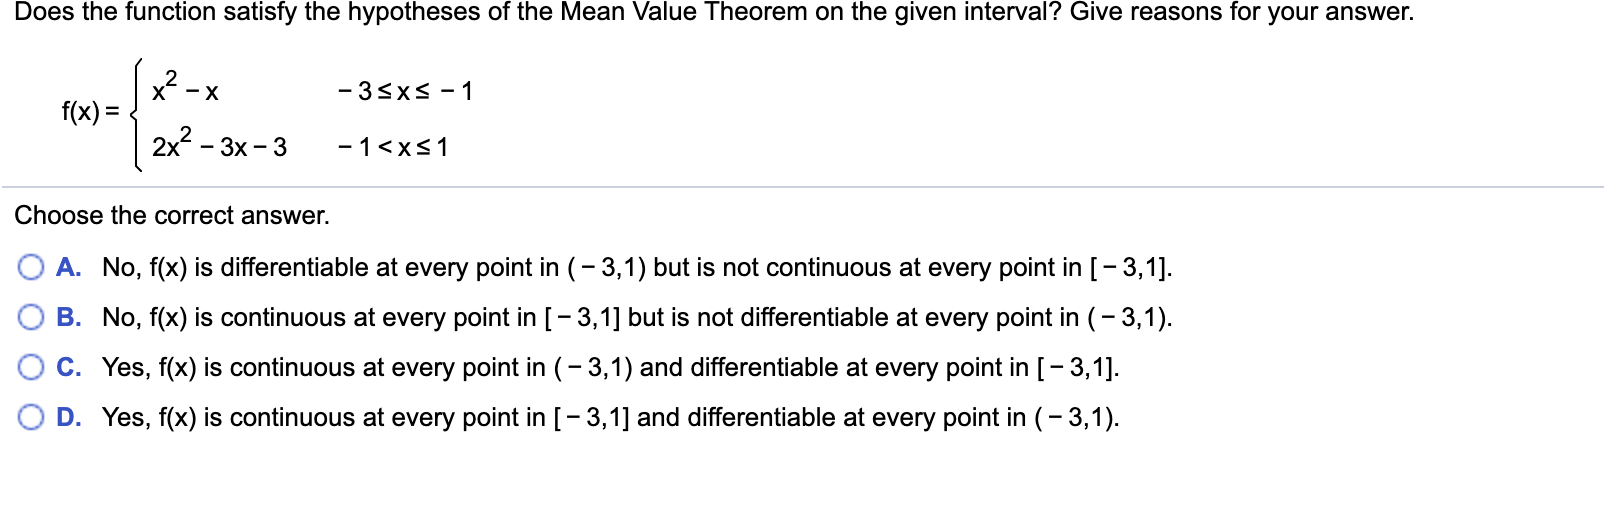 Does the function satisfy the hypotheses of the Mean Value Theorem on the given interval? Give reasons for your answer.
-3sxs-1
- X
f(x)
2x2
- 3x 3
-1 <xs1
Choose the correct answer.
A. No, f(x) is differentiable at every point in (-3,1) but is not continuous at every point in [-3,1].
B. No, f(x) is continuous at every point in [- 3,1] but is not differentiable at every point in (-3,1)
C. Yes, f(x) is continuous at every point in (-3,1) and differentiable at every point in [-3,1]
D. Yes, f(x) is continuous at every point in [-3,1] and differentiable at every point in (-3,1).
